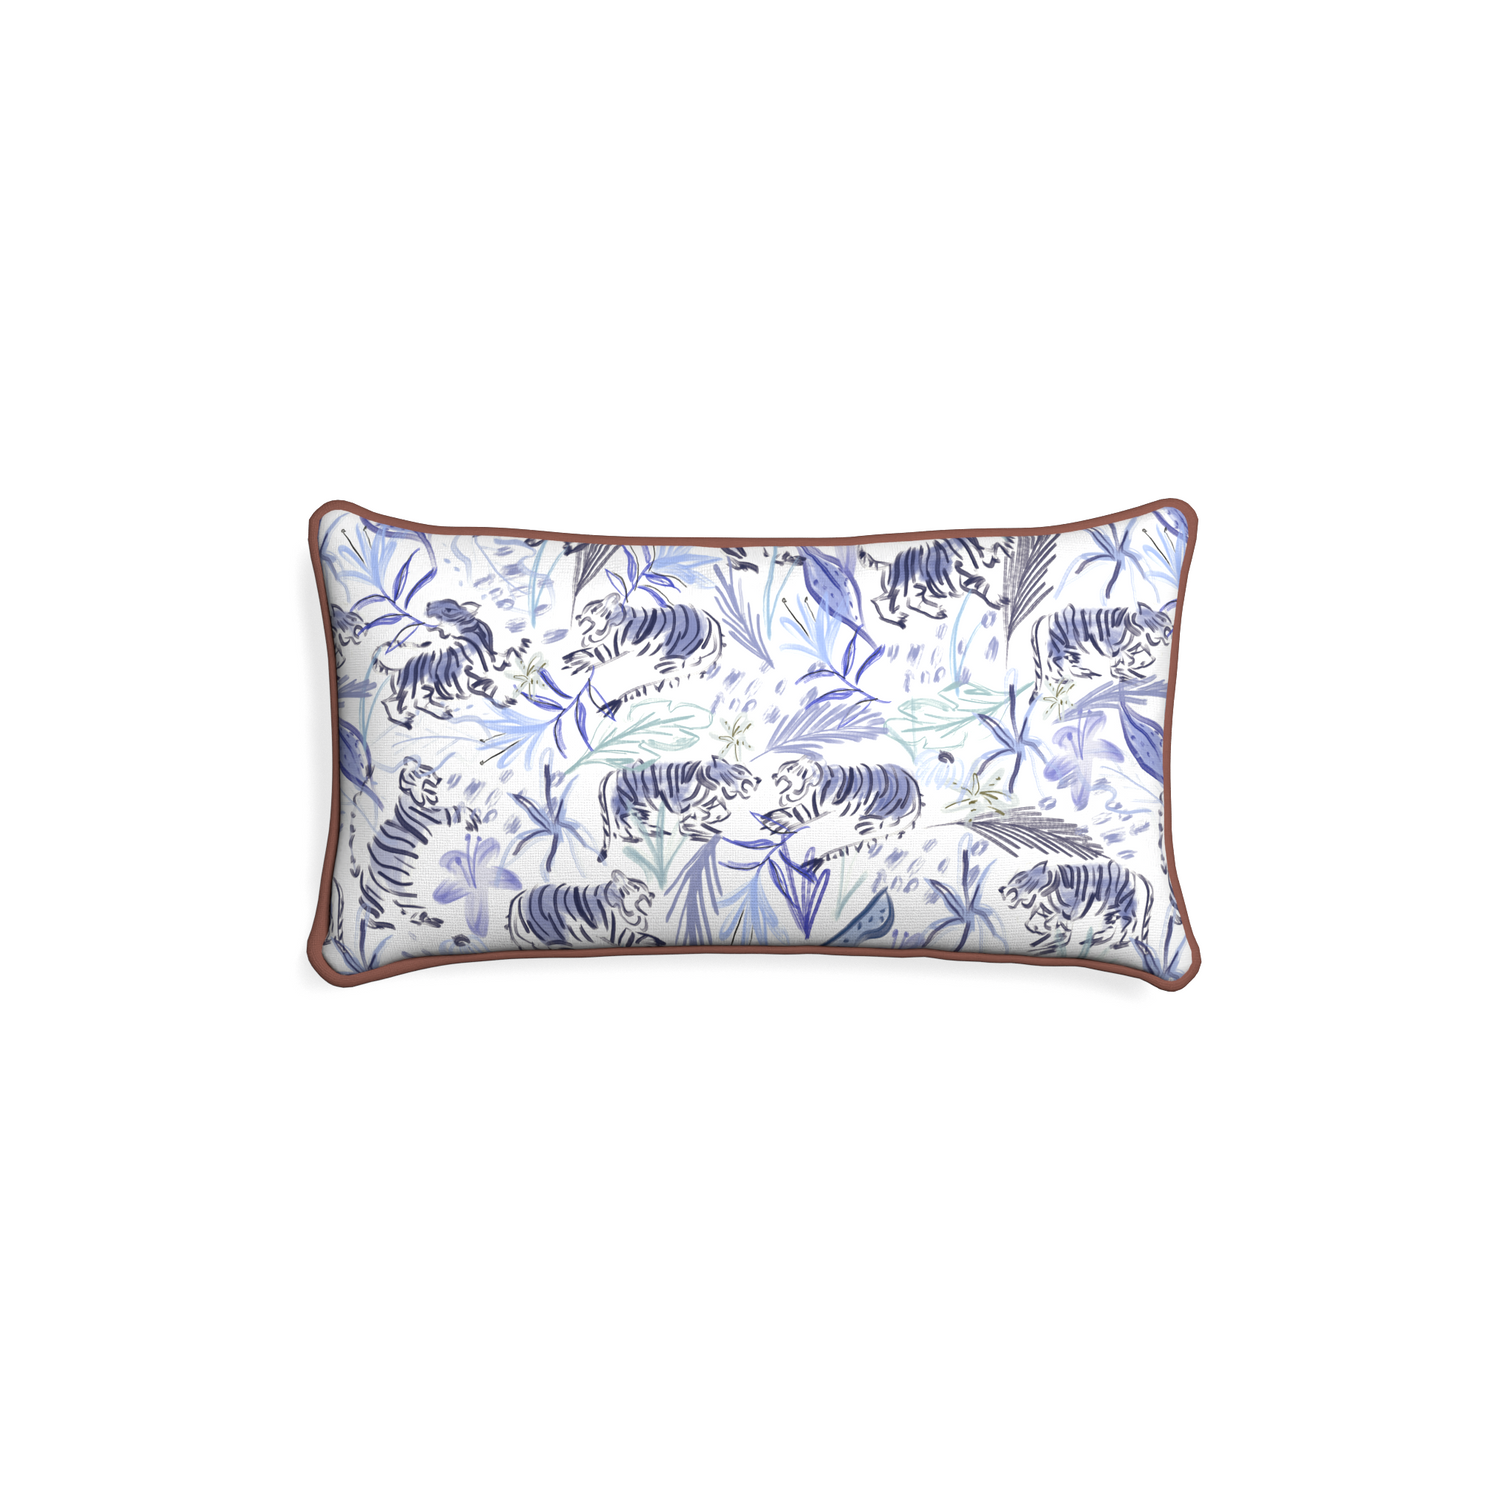 Petite-lumbar frida blue custom blue with intricate tiger designpillow with w piping on white background